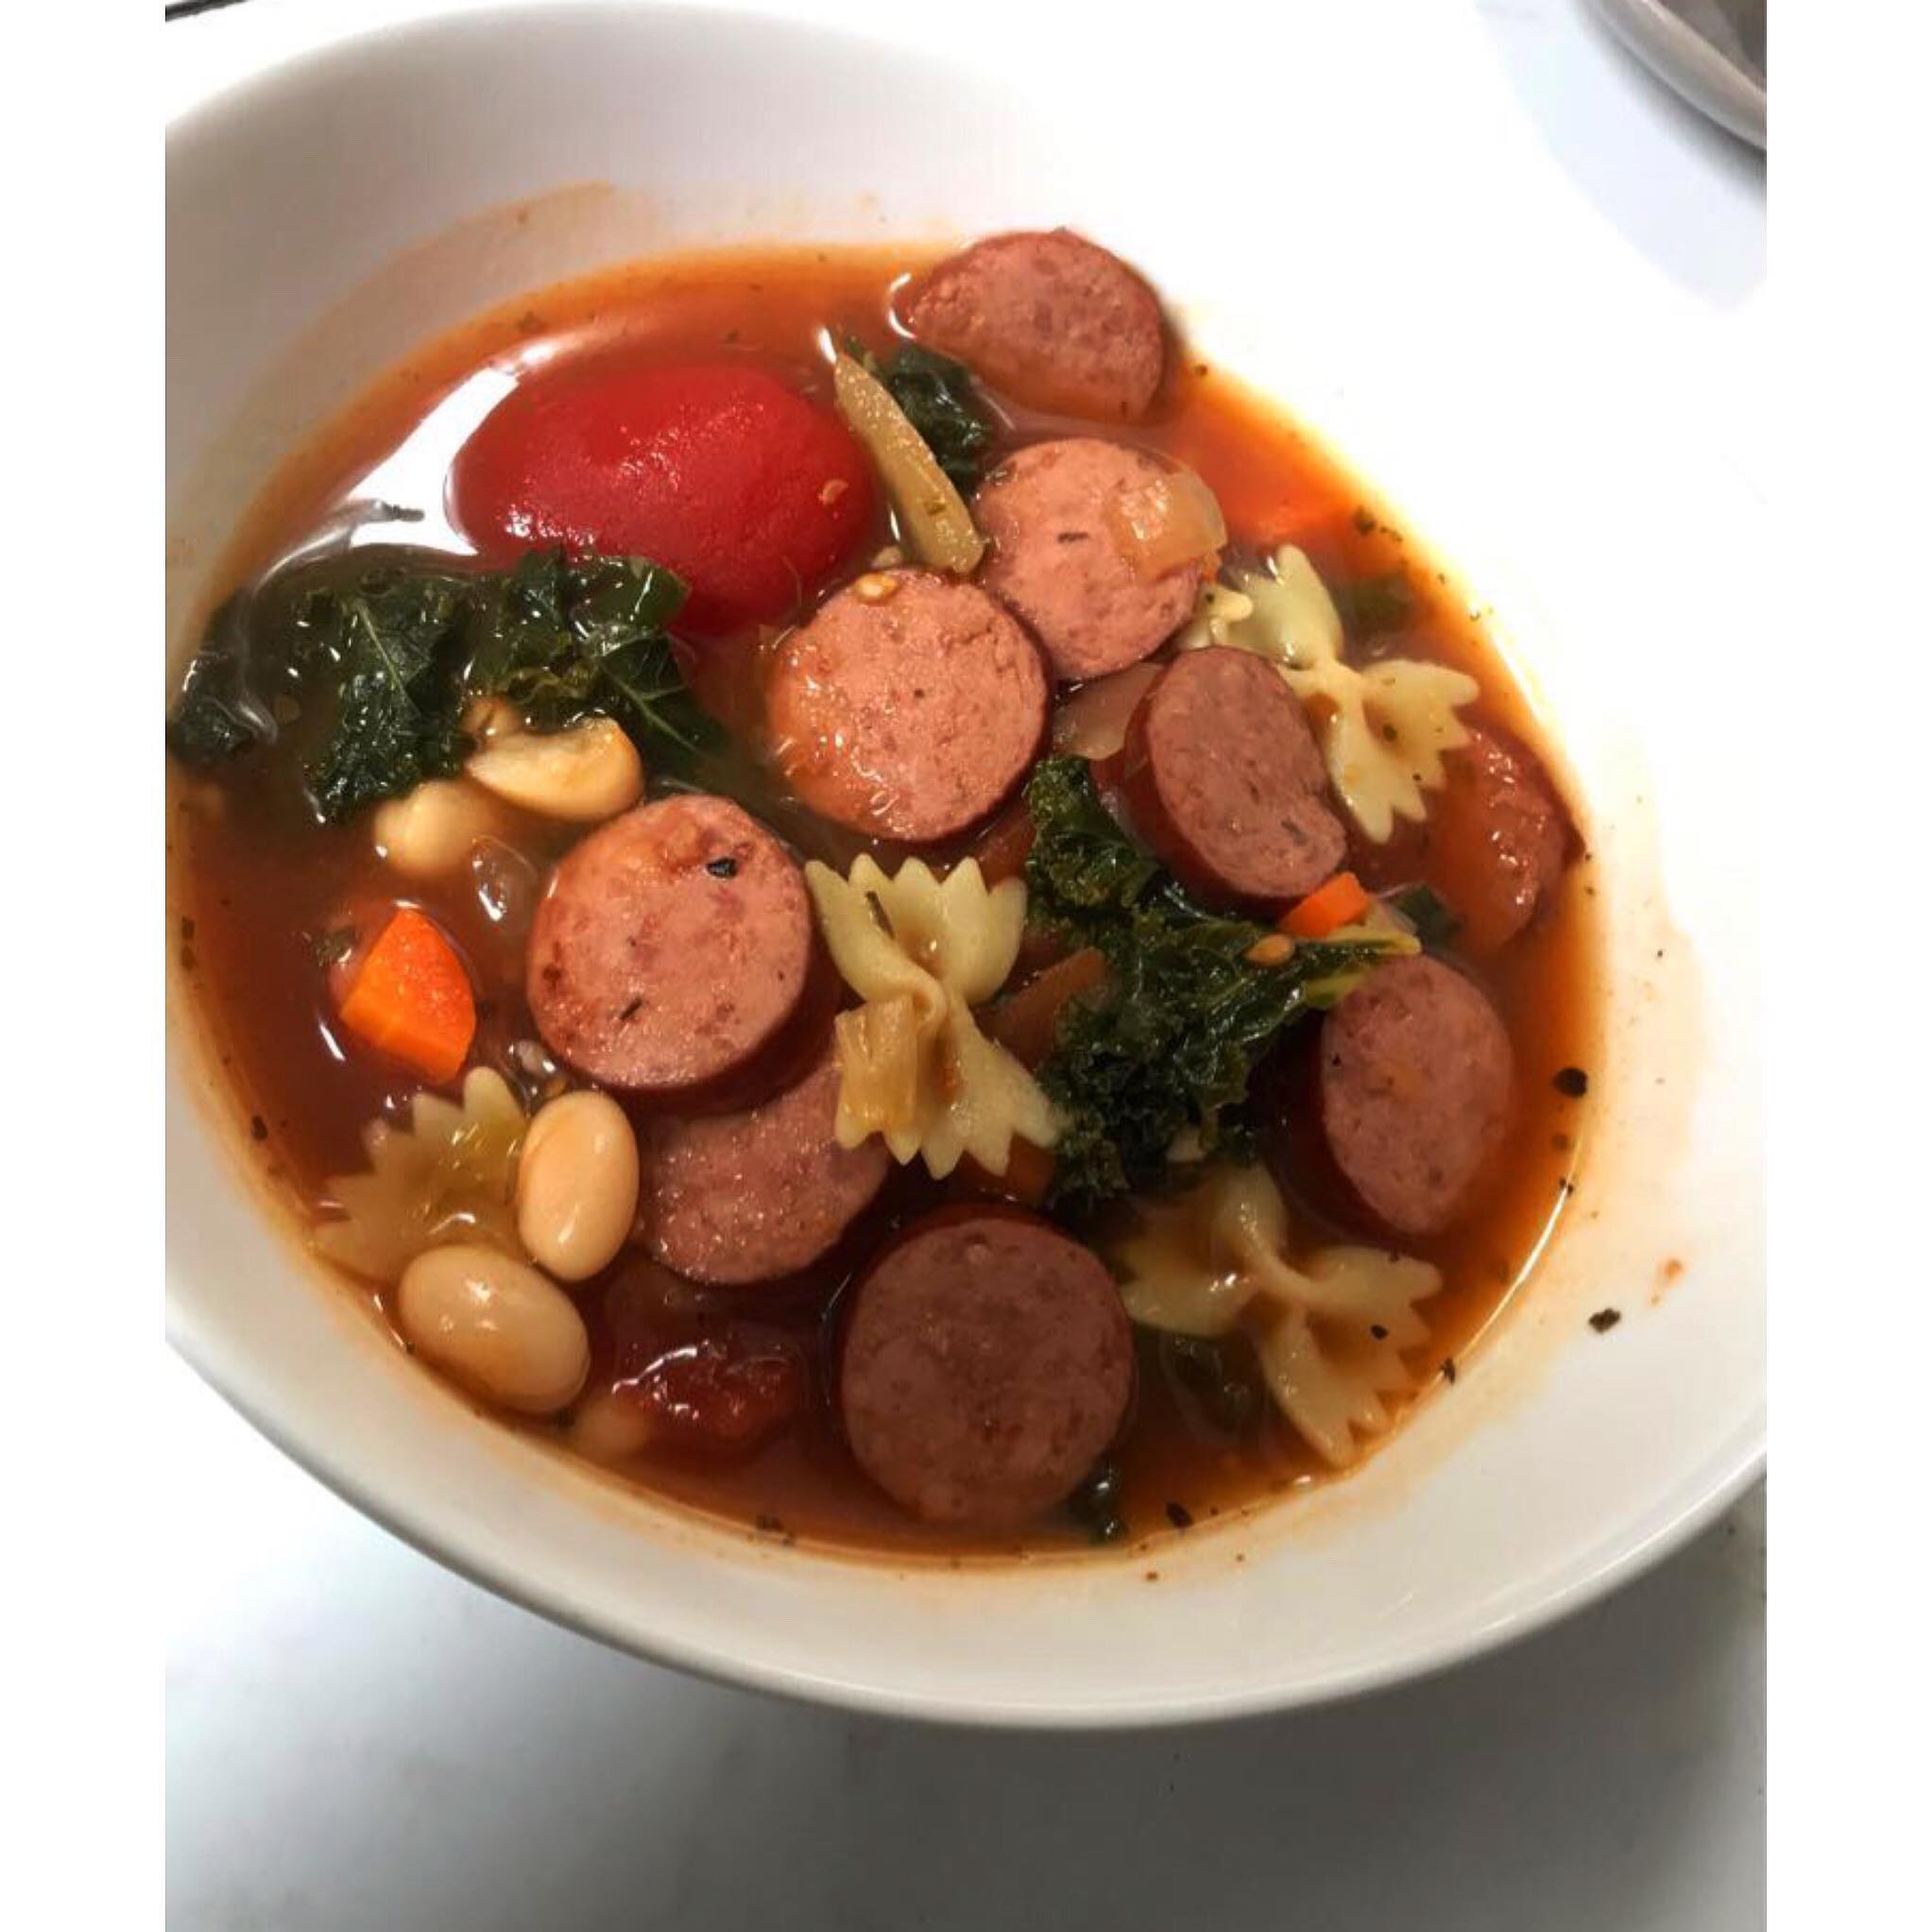 Sadly soup season is coming to an end. Finishing strong with a throw together and what was supposed to be just a kielbasa, white bean and kale soup then added some whole tomatoes and carrots then pasta then it really just got away from me. Super freakin delicious but probably never be replicated. So it lives only in my memories.. and this post.